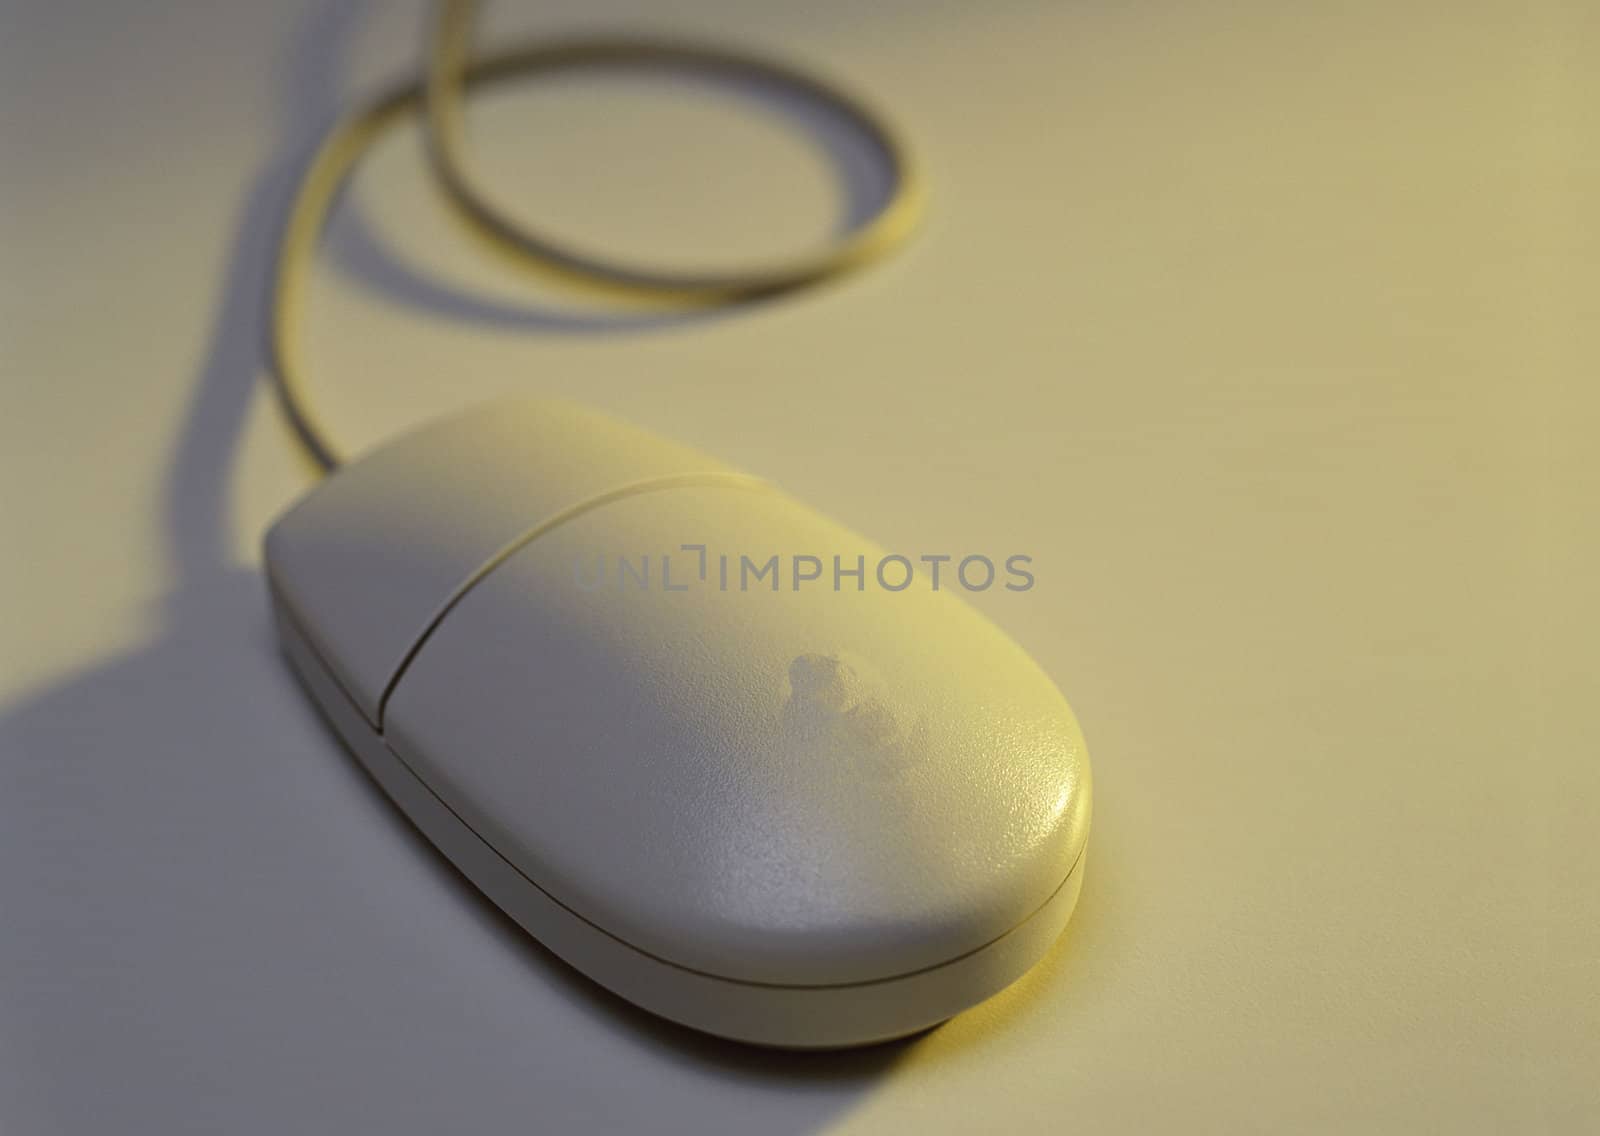 A wired computer mouse by Baltus